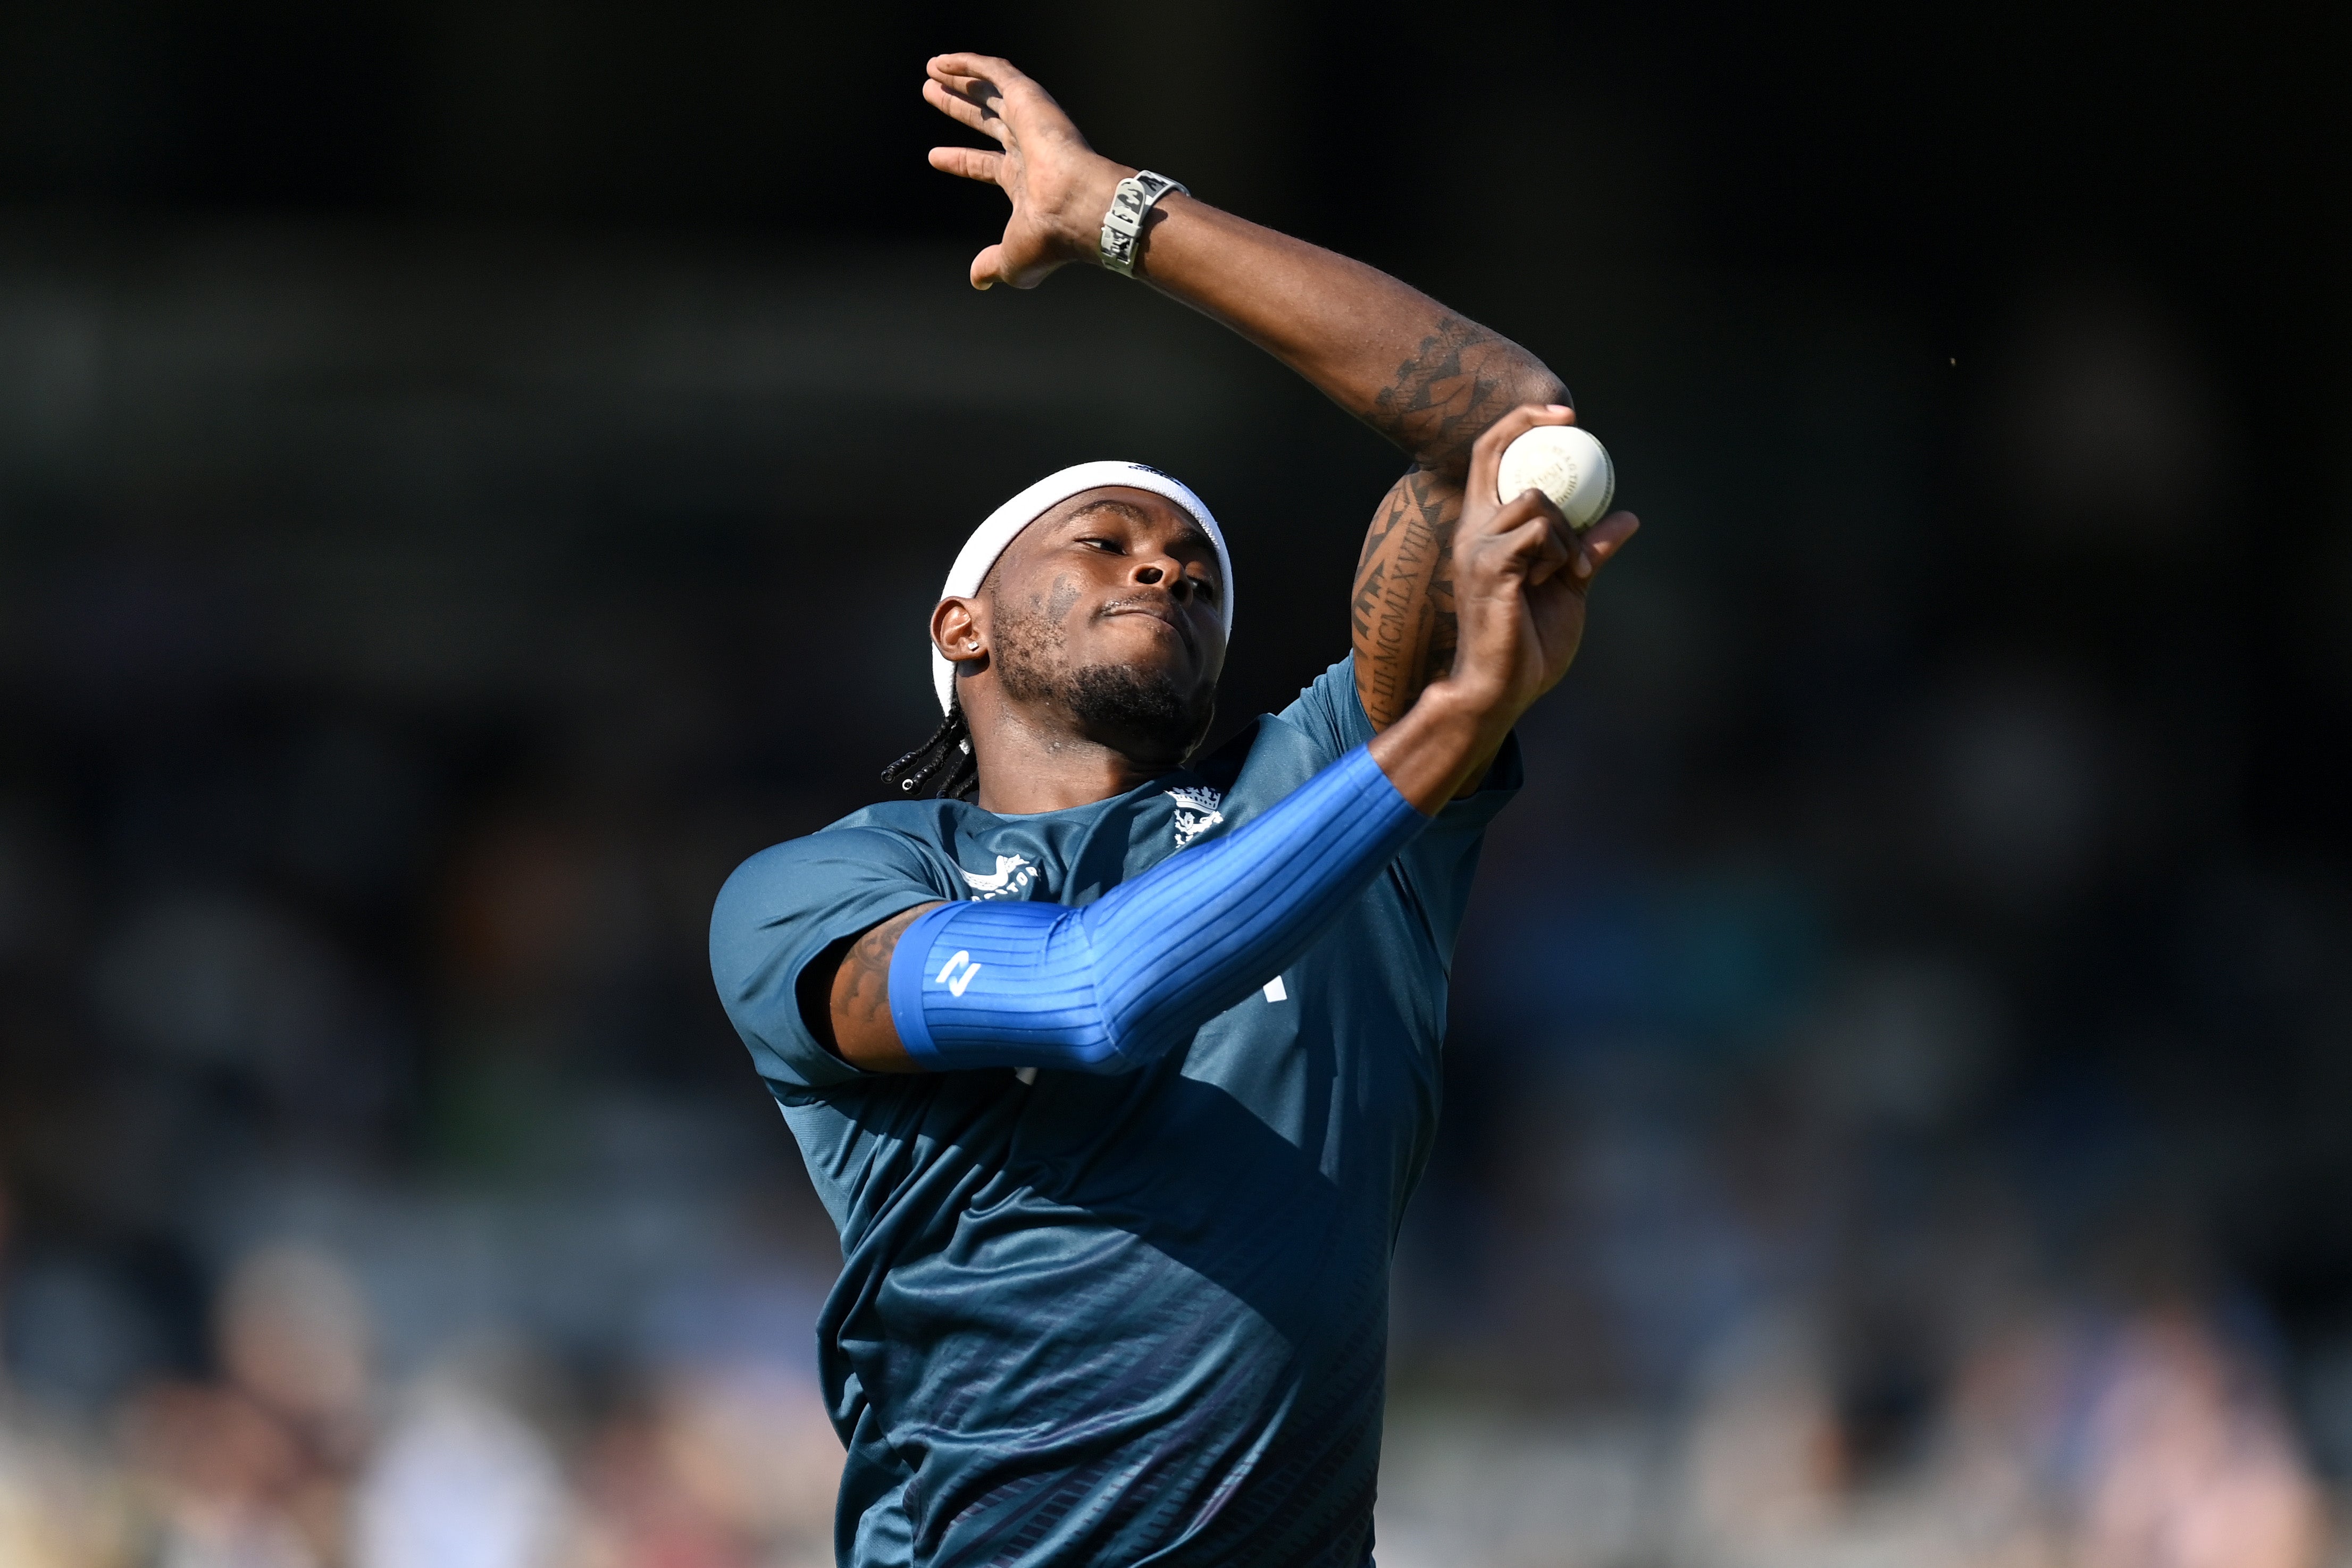 Jofra Archer has been named in England’s provisional T20 World Cup squad